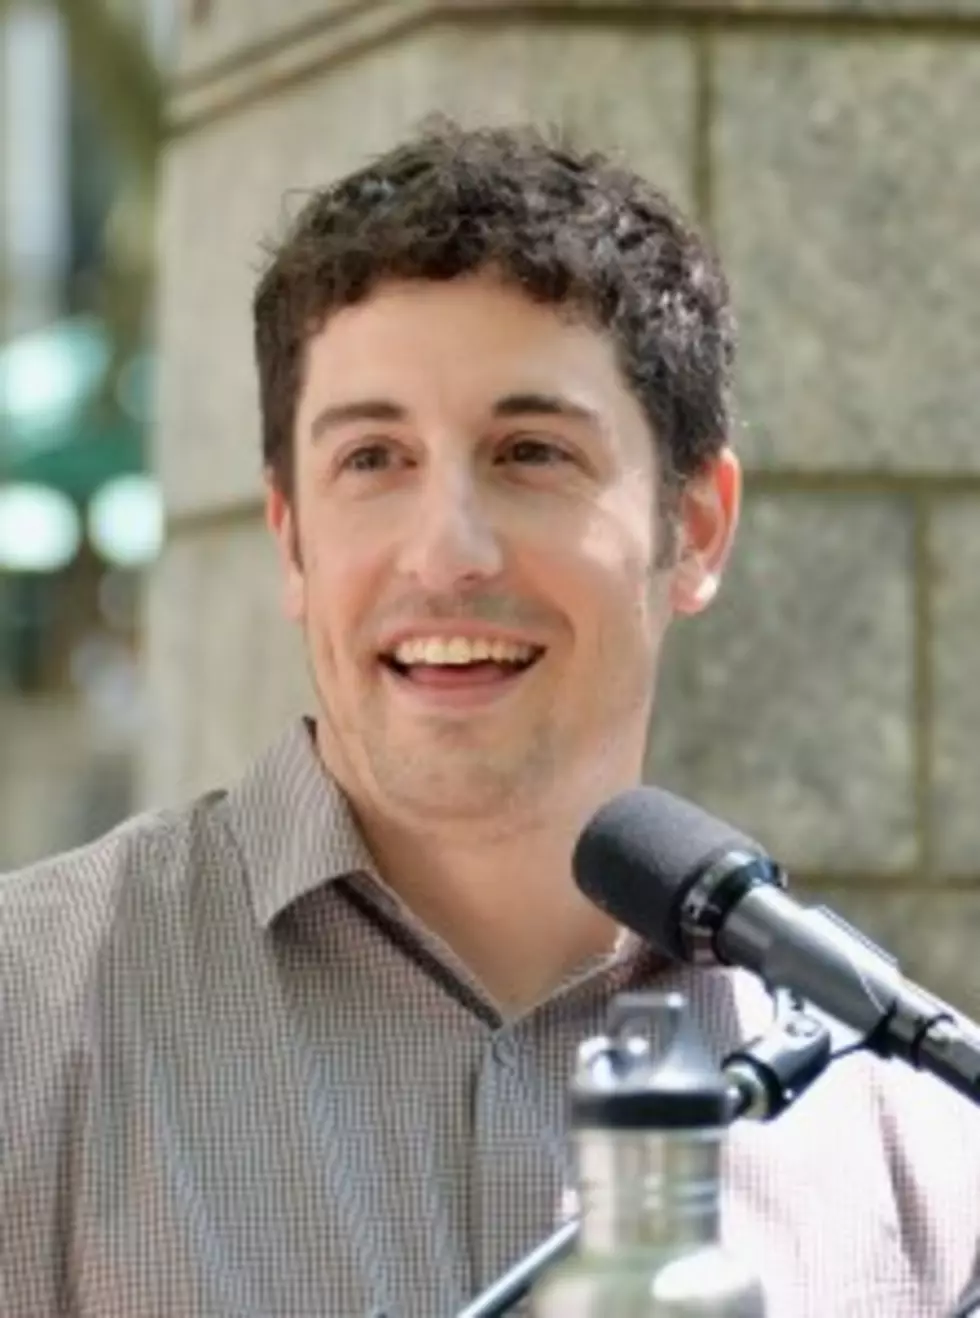 Jason Biggs jokes about Malaysia Airlines plane crash:  Funny or wrong?